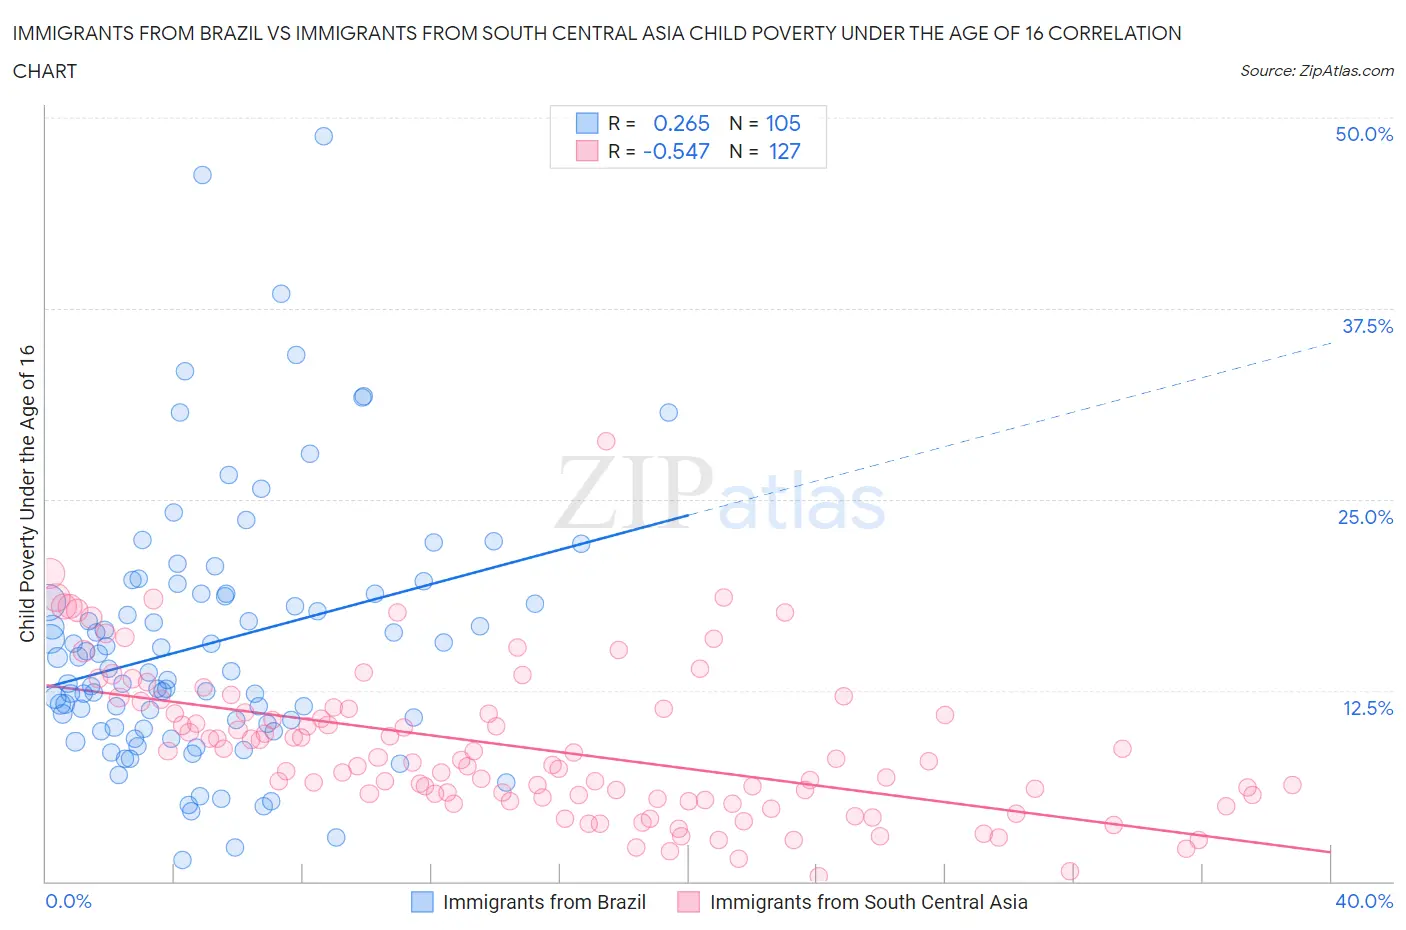 Immigrants from Brazil vs Immigrants from South Central Asia Child Poverty Under the Age of 16